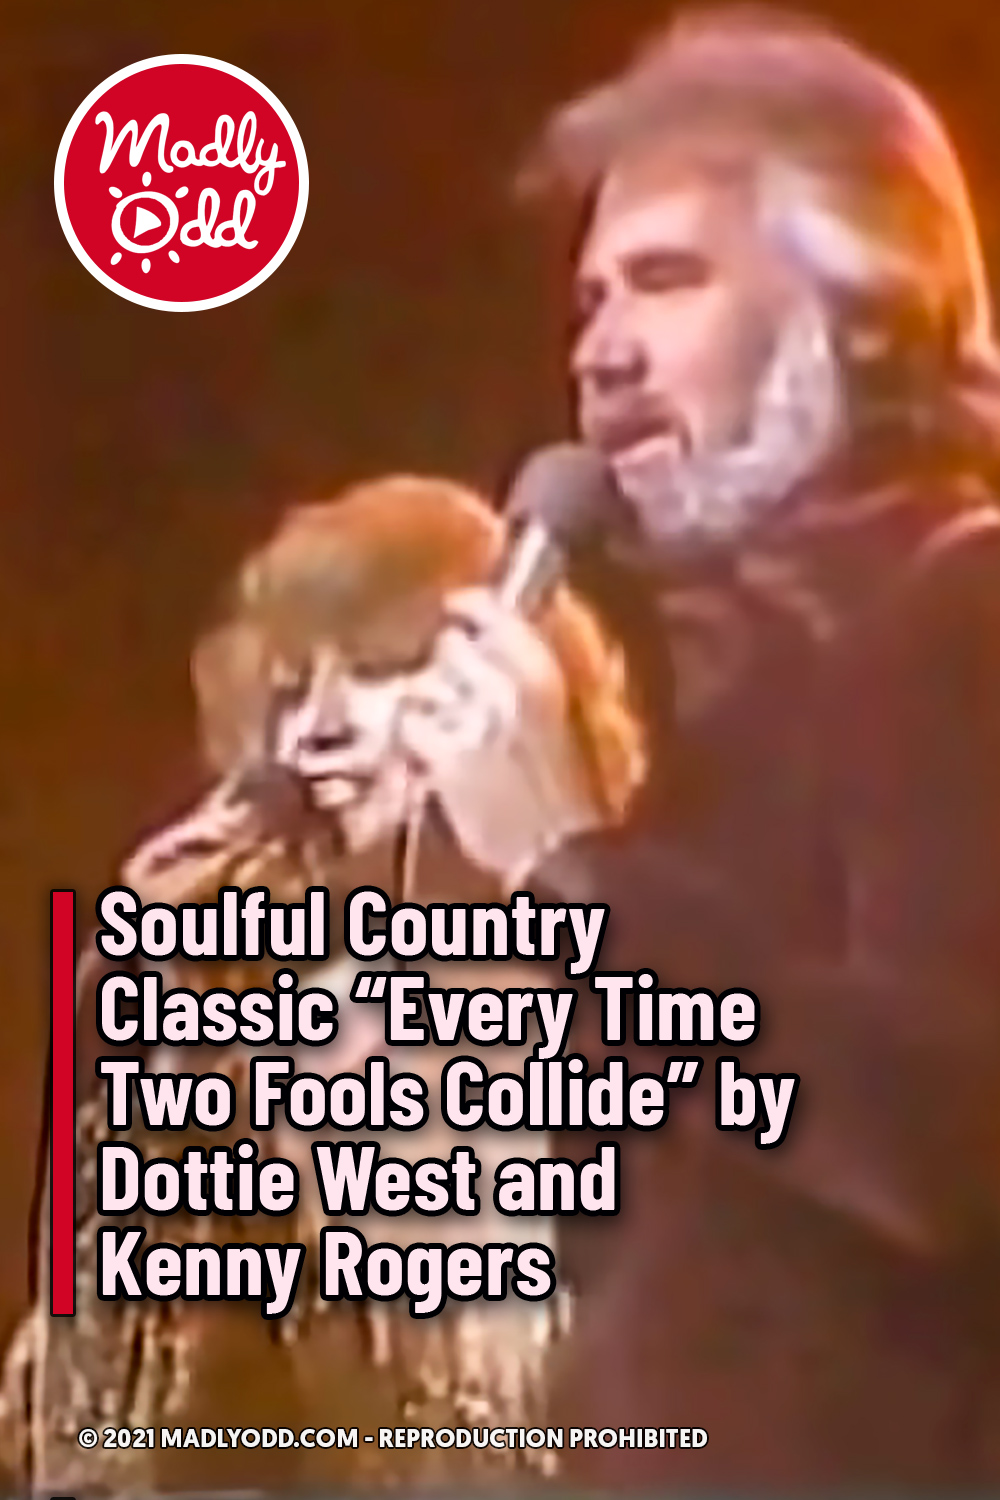 Soulful Country Classic “Every Time Two Fools Collide” by Dottie West and Kenny Rogers